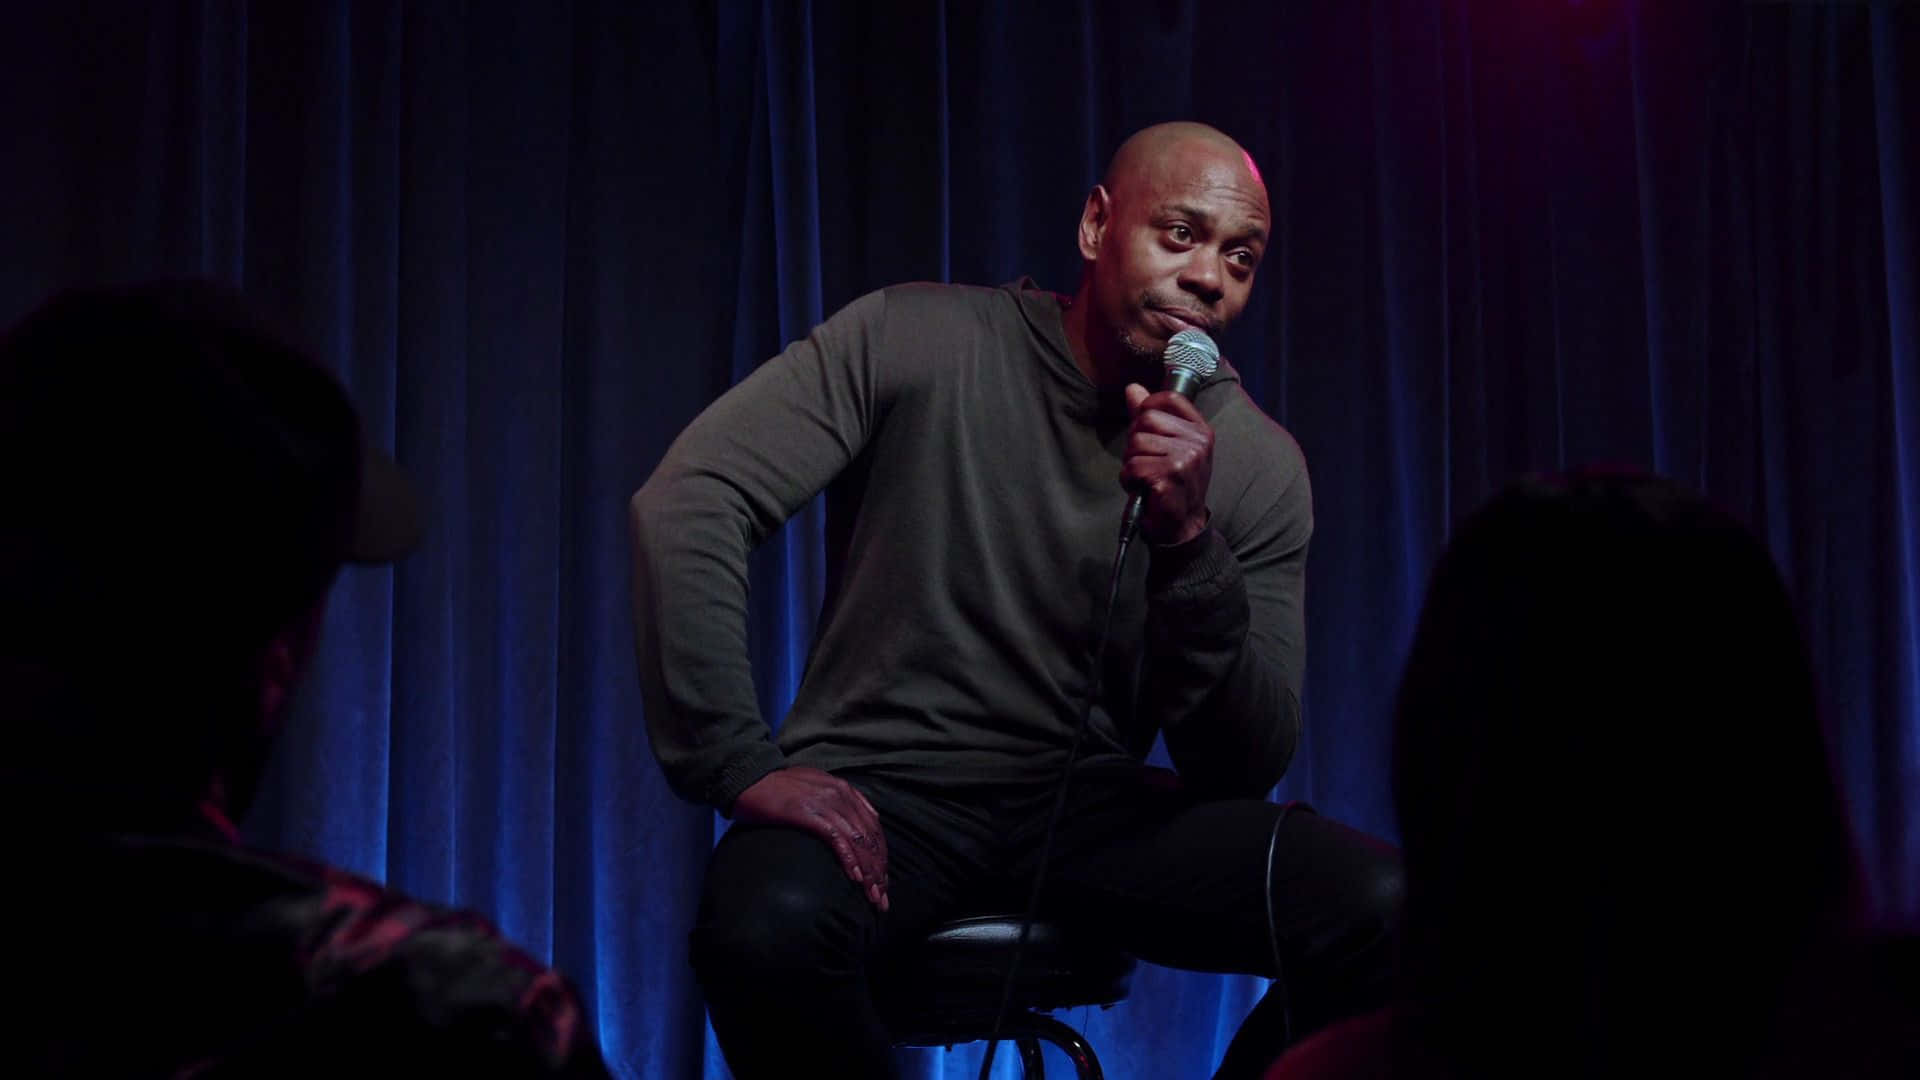 Dave Chappelle On Stage Delivering A Powerful Performance